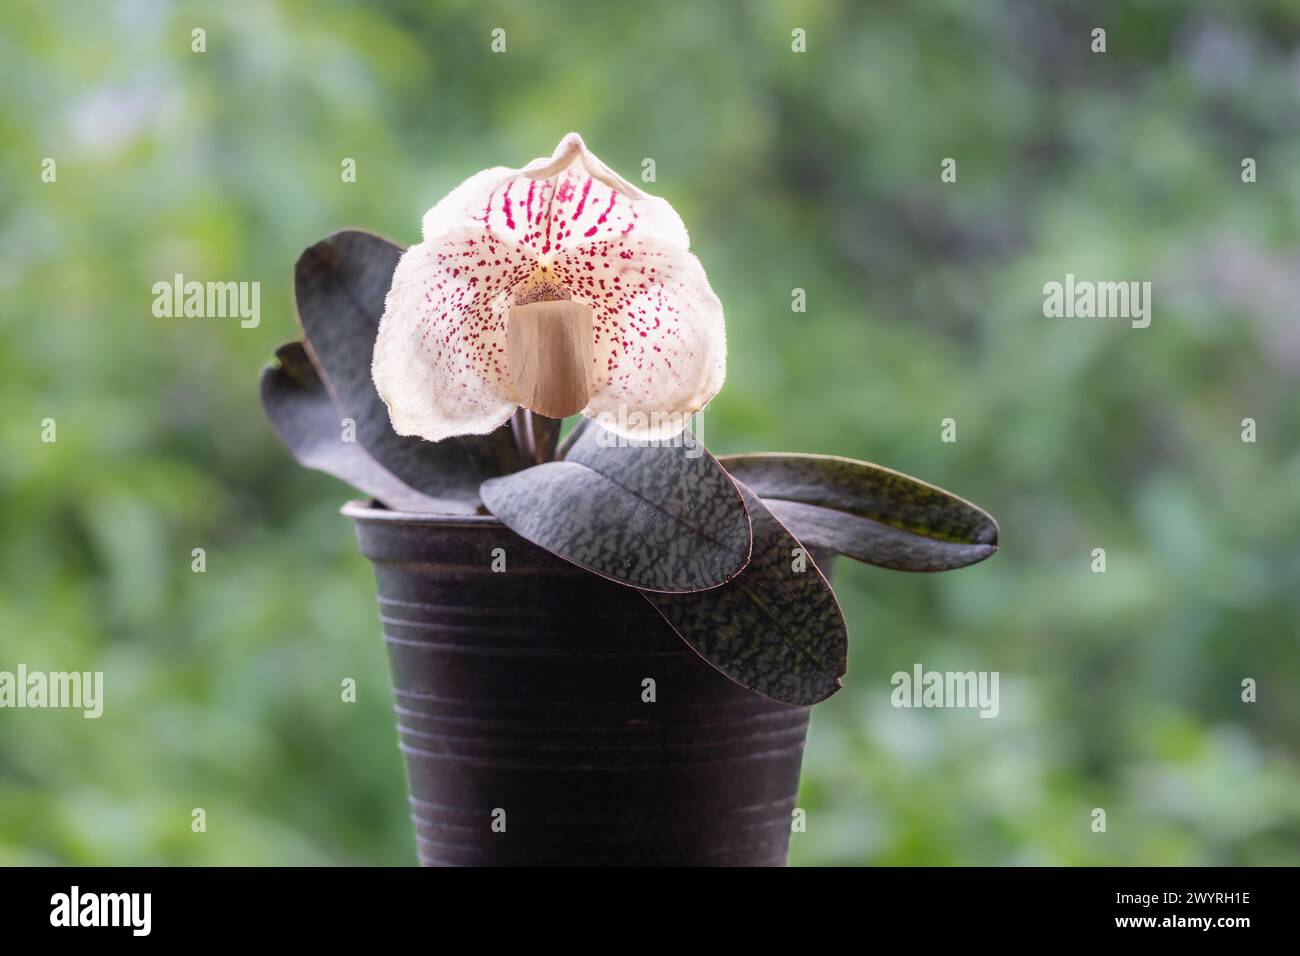 Closeup view of backlit lady slipper orchid paphiopedilum godefroyae var ang-thong in pot with flower and leaves isolated on natural background Stock Photo